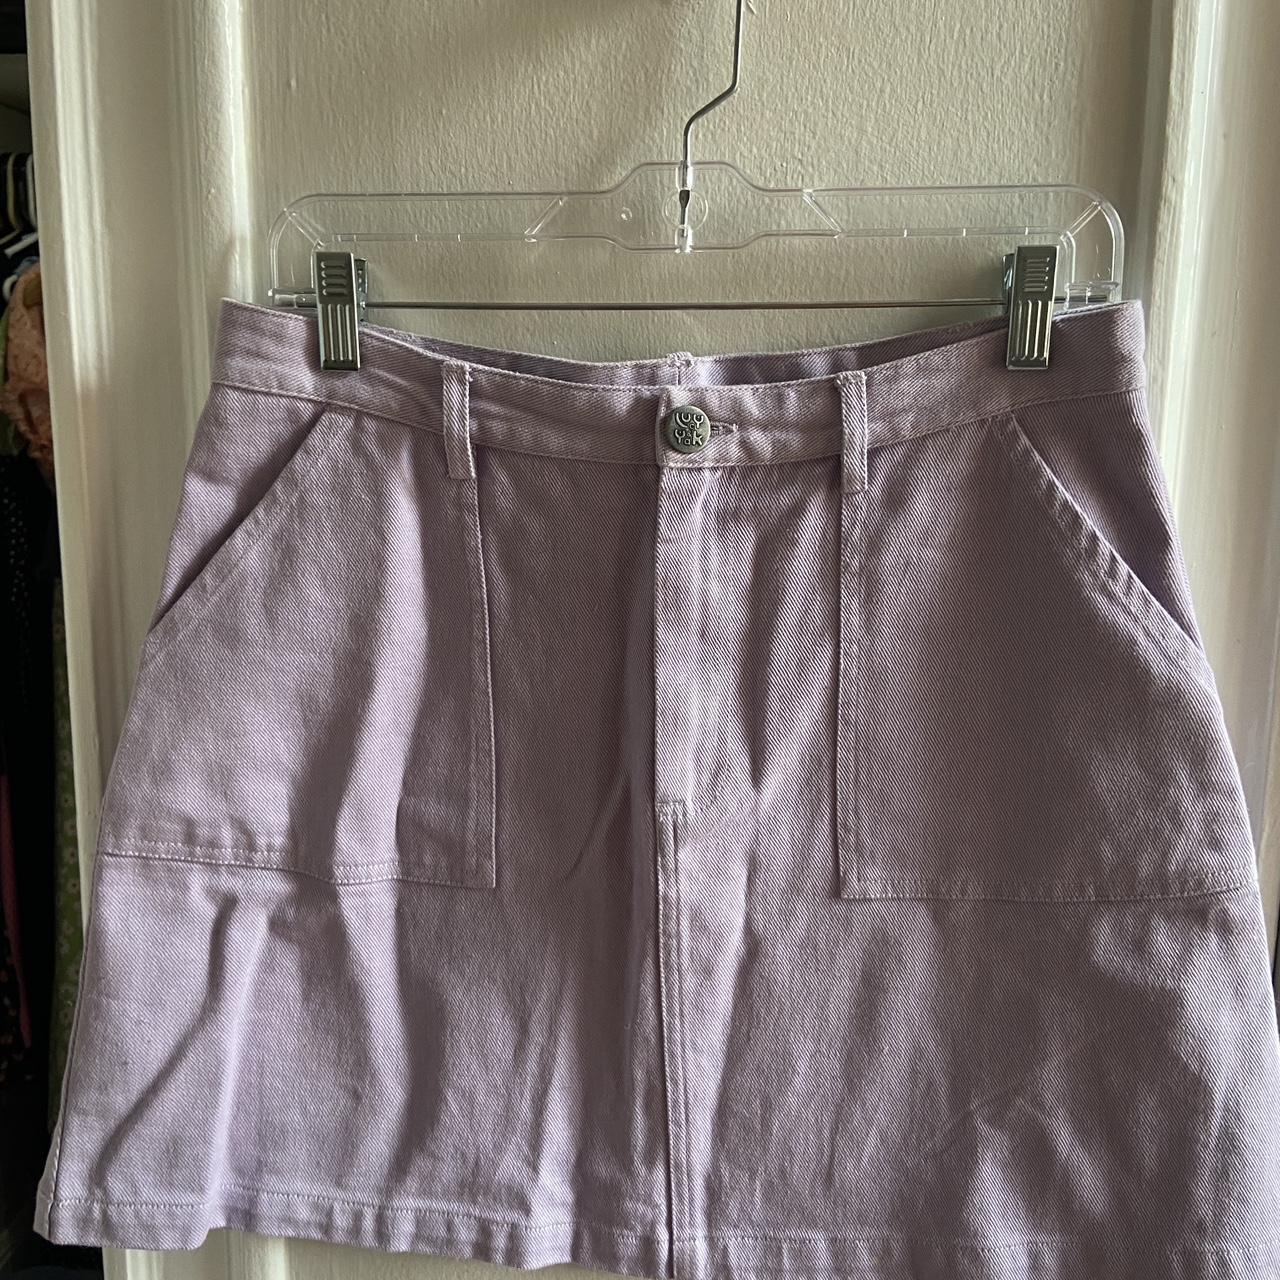 lavender lucy&yak mini skirt only worn once 💜🤍💜 - Depop